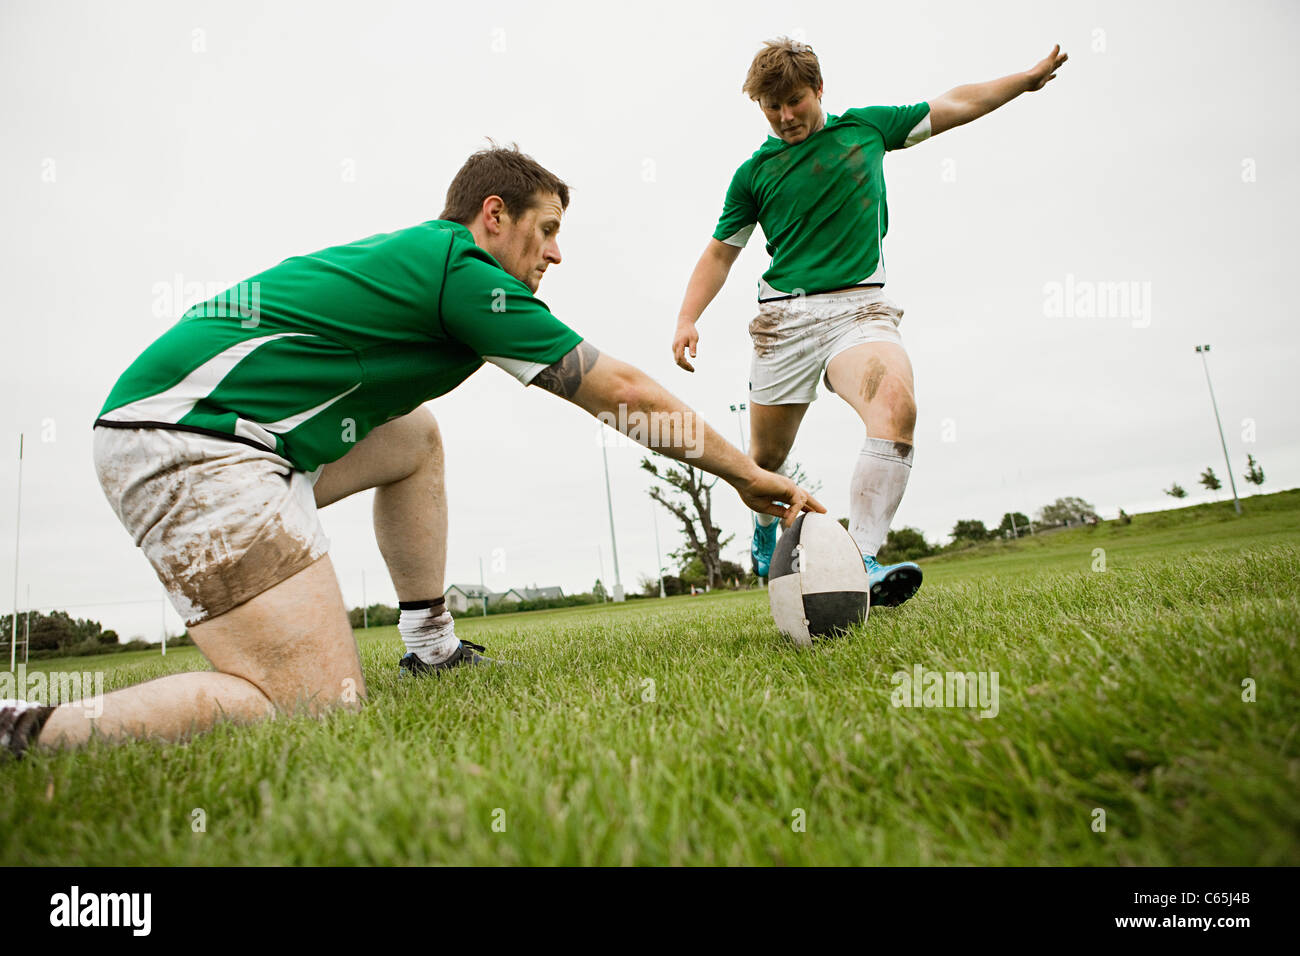 Rugby player kicking ball Stock Photo